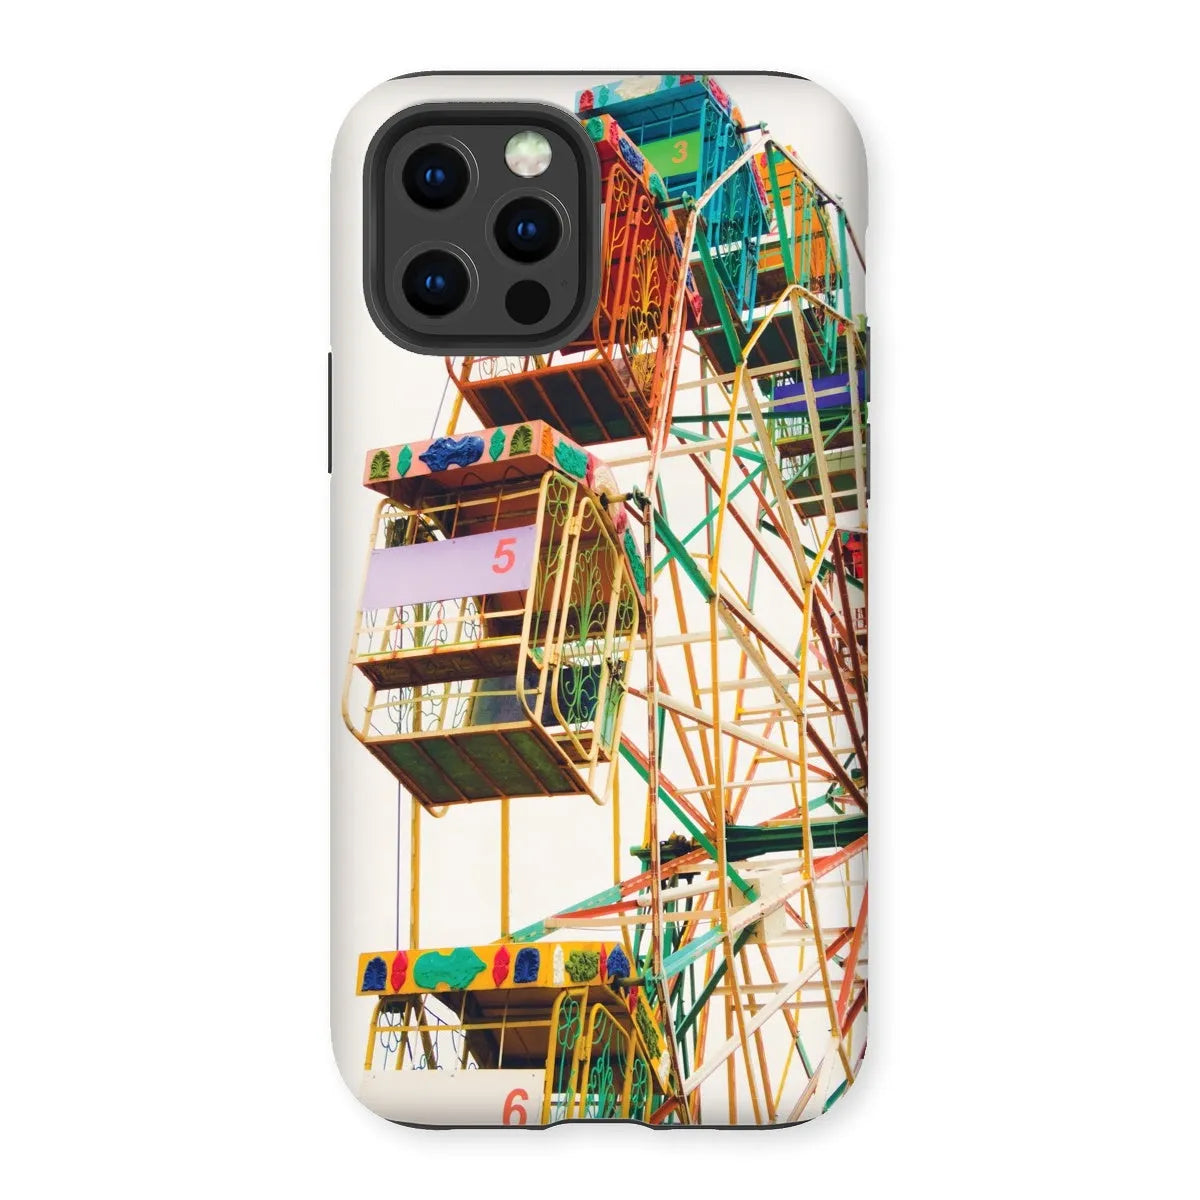 Wheel Of Fortune Tough Phone Case - Iphone 12 Pro / Matte - Mobile Phone Cases - Aesthetic Art